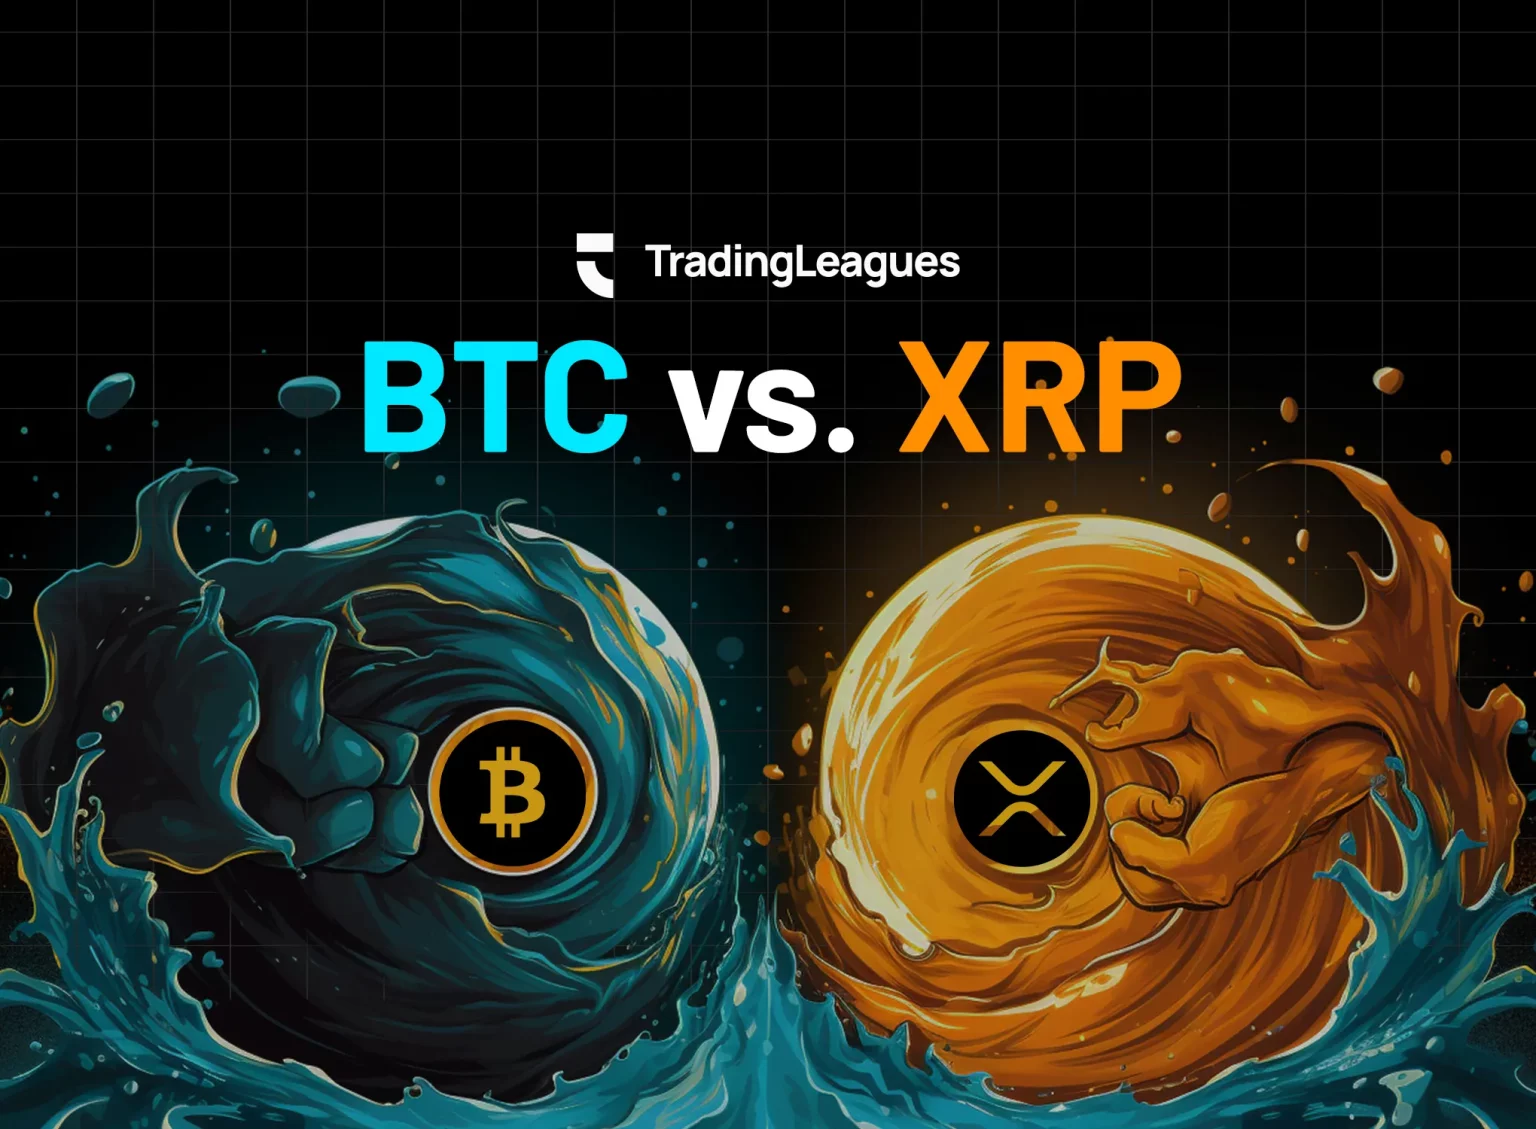 Bitcoin (BTC) vs. Ripple Labs (XRP): What are the key differences?